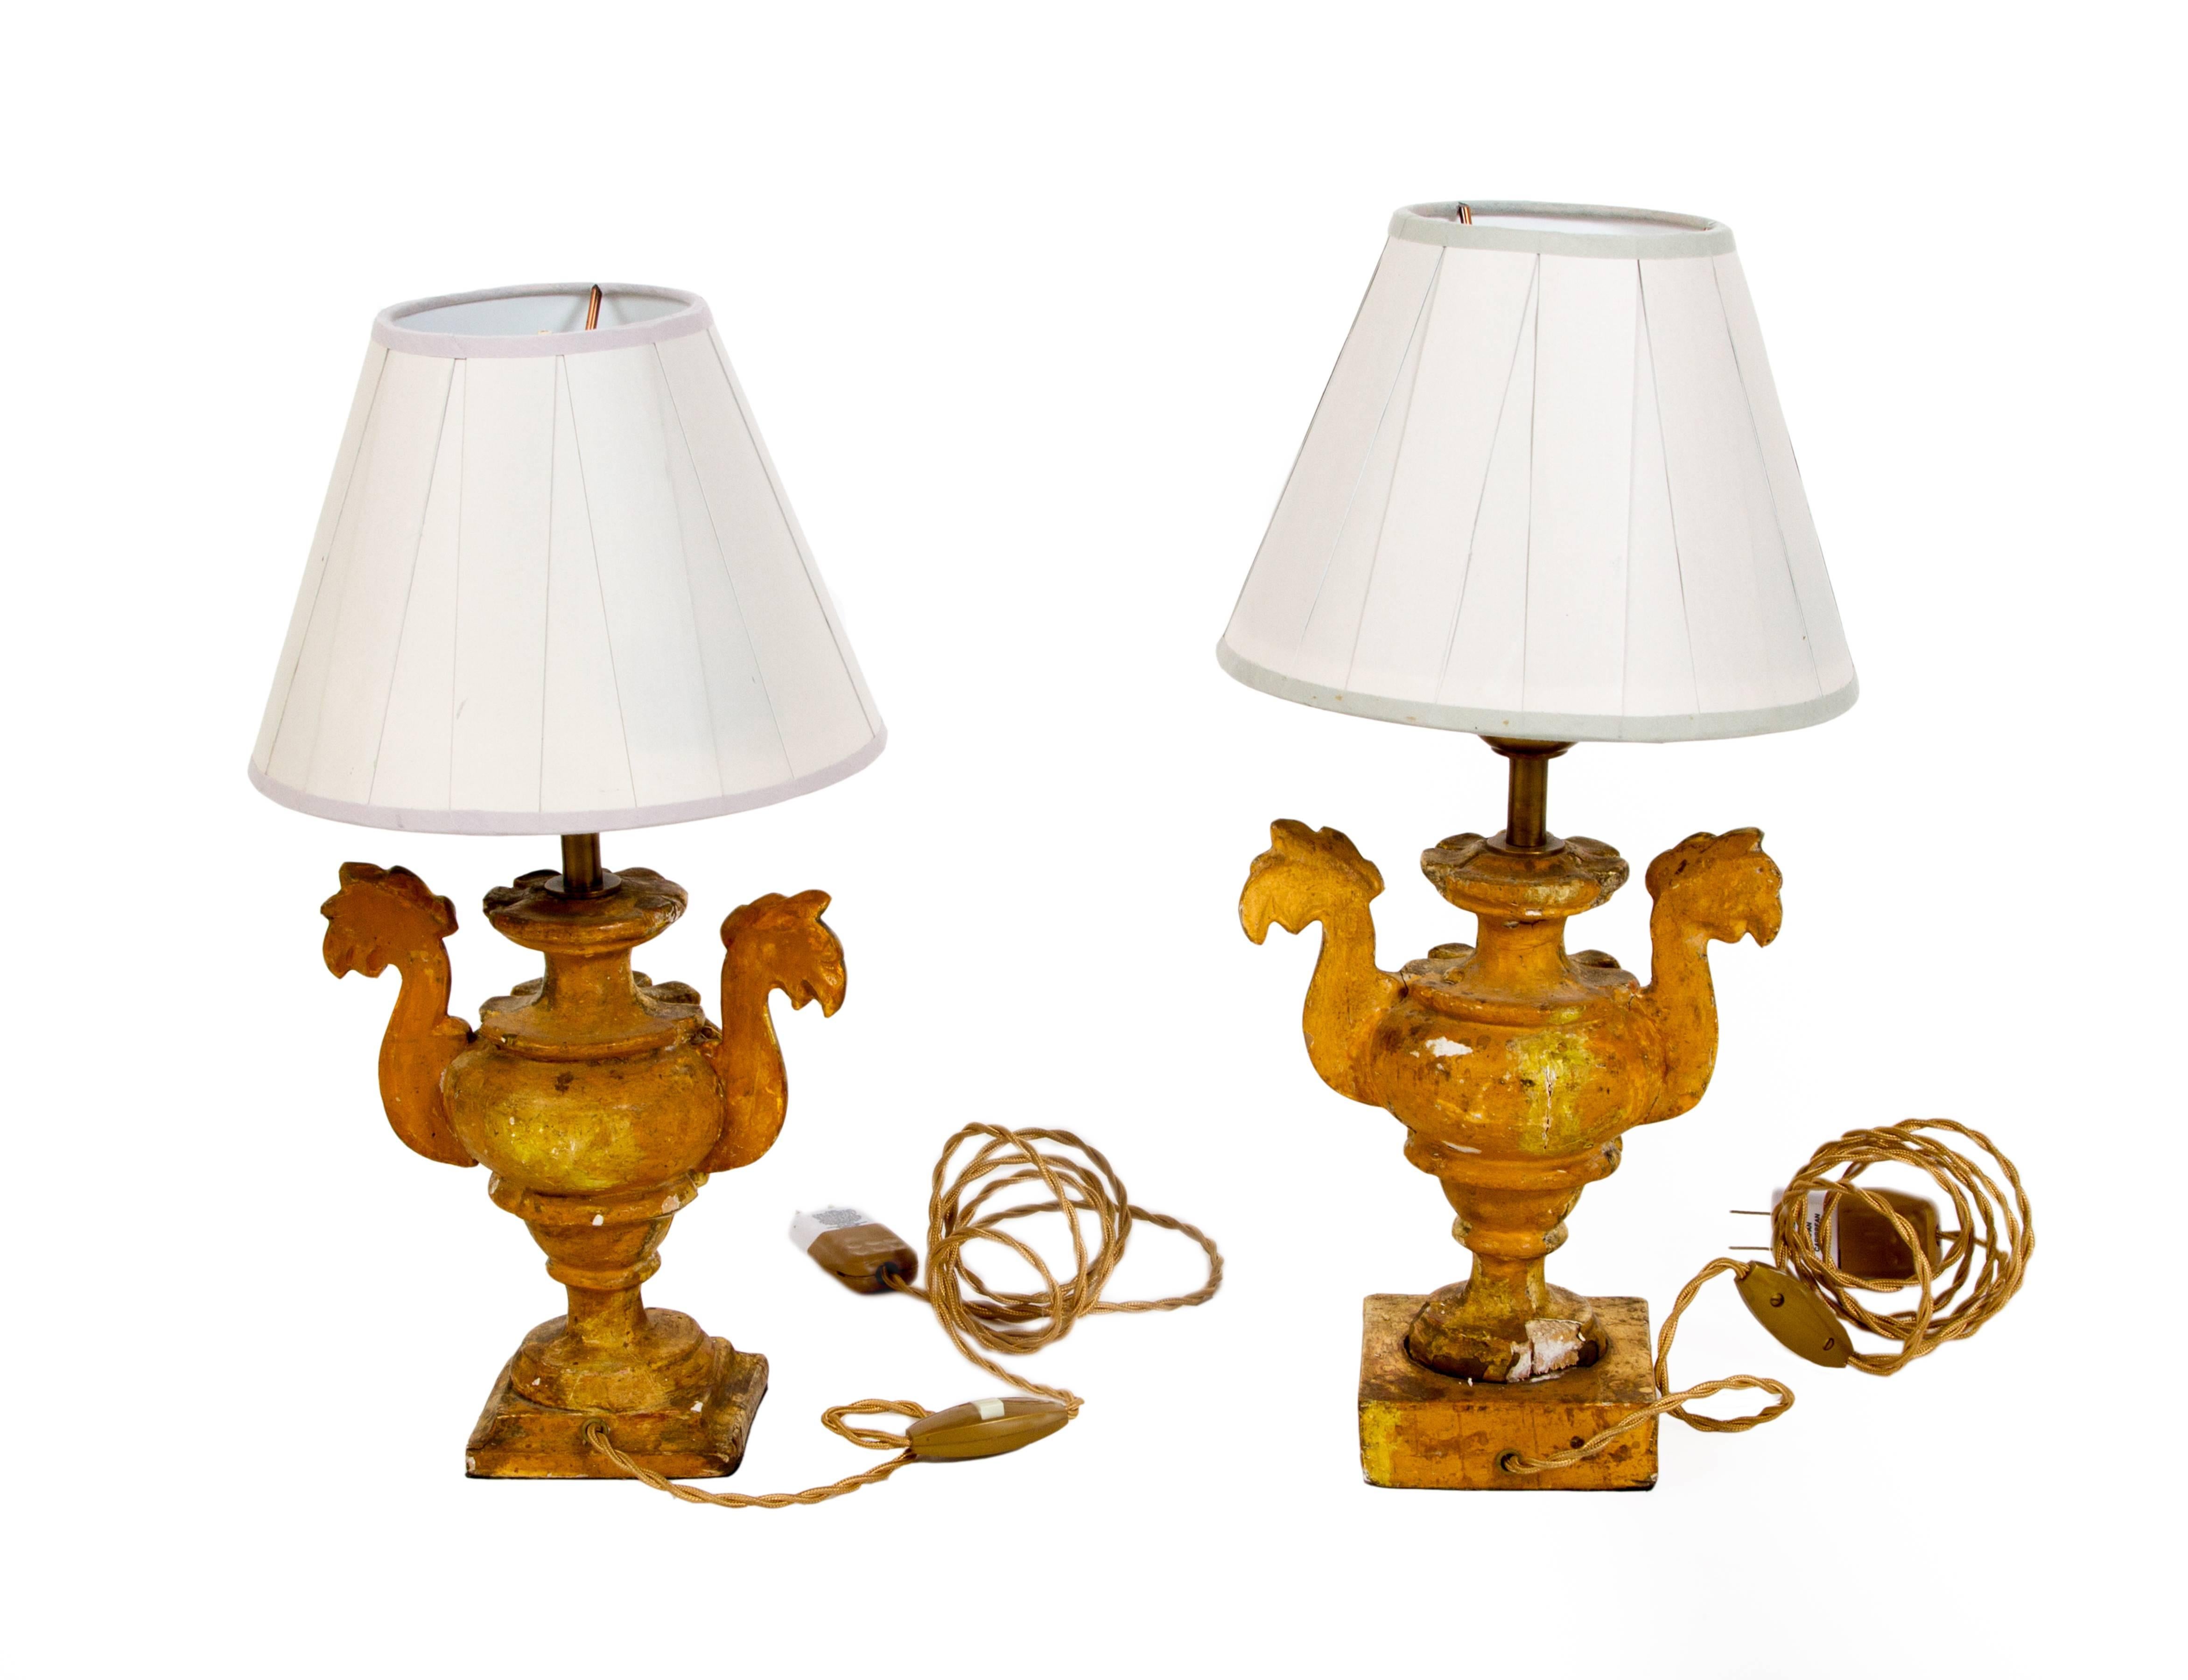 19th century pair of painted and parcel giltwood lamps from Tuscany.
Most likely made into lamps from altarsticks. One side is painted in yellow gold and the other side is gilded, which would have faced out towards the congregation.
Paper shades